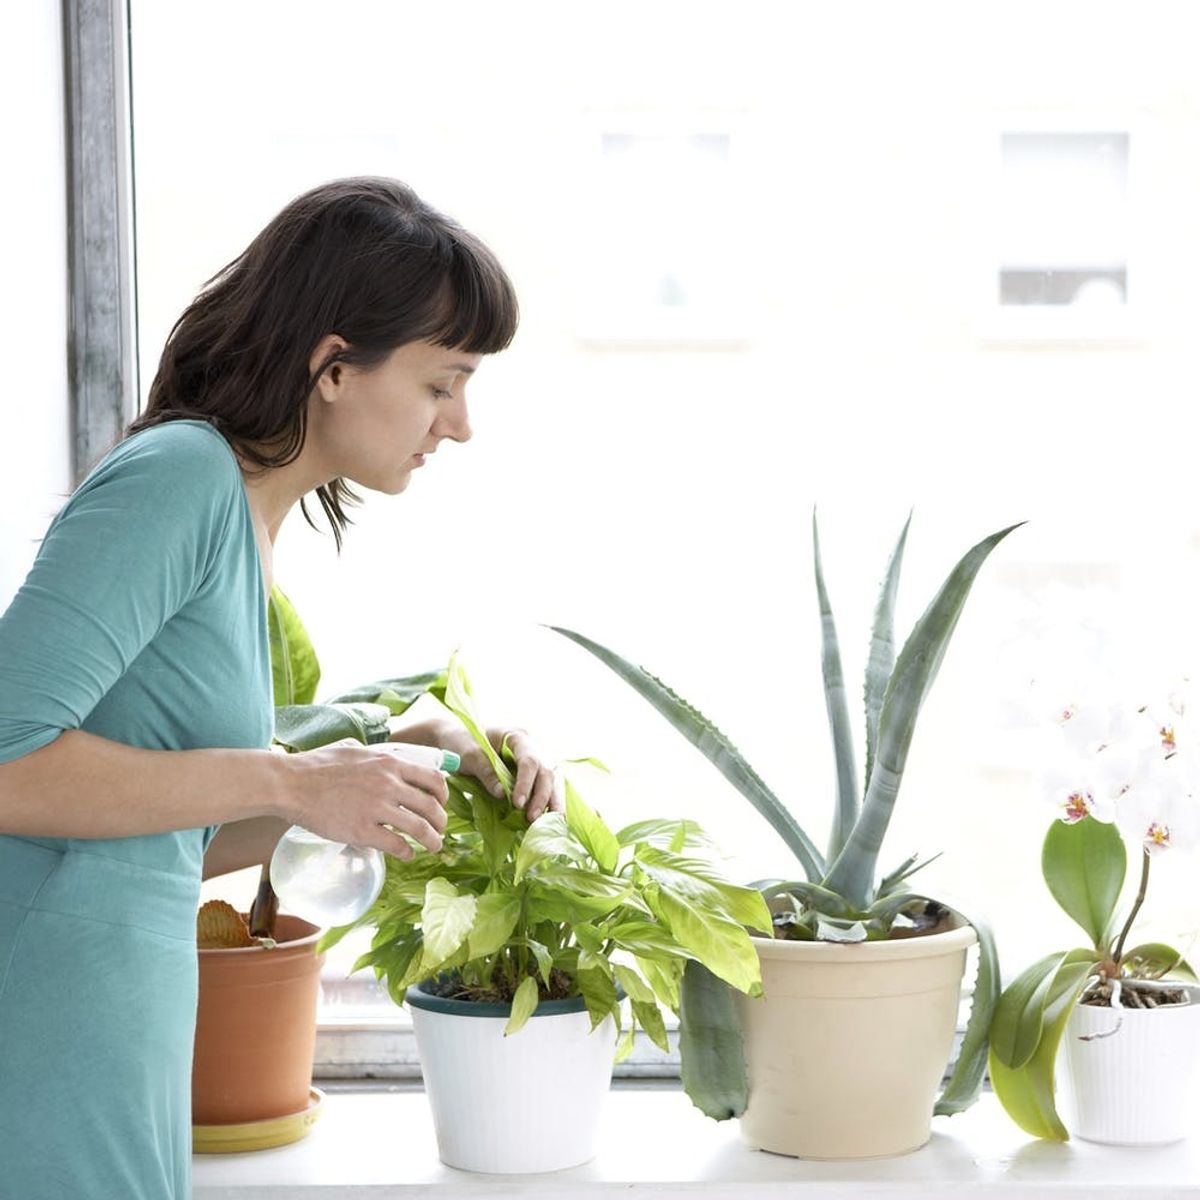 The 5 Best Hacks to Keep Your Plants Alive